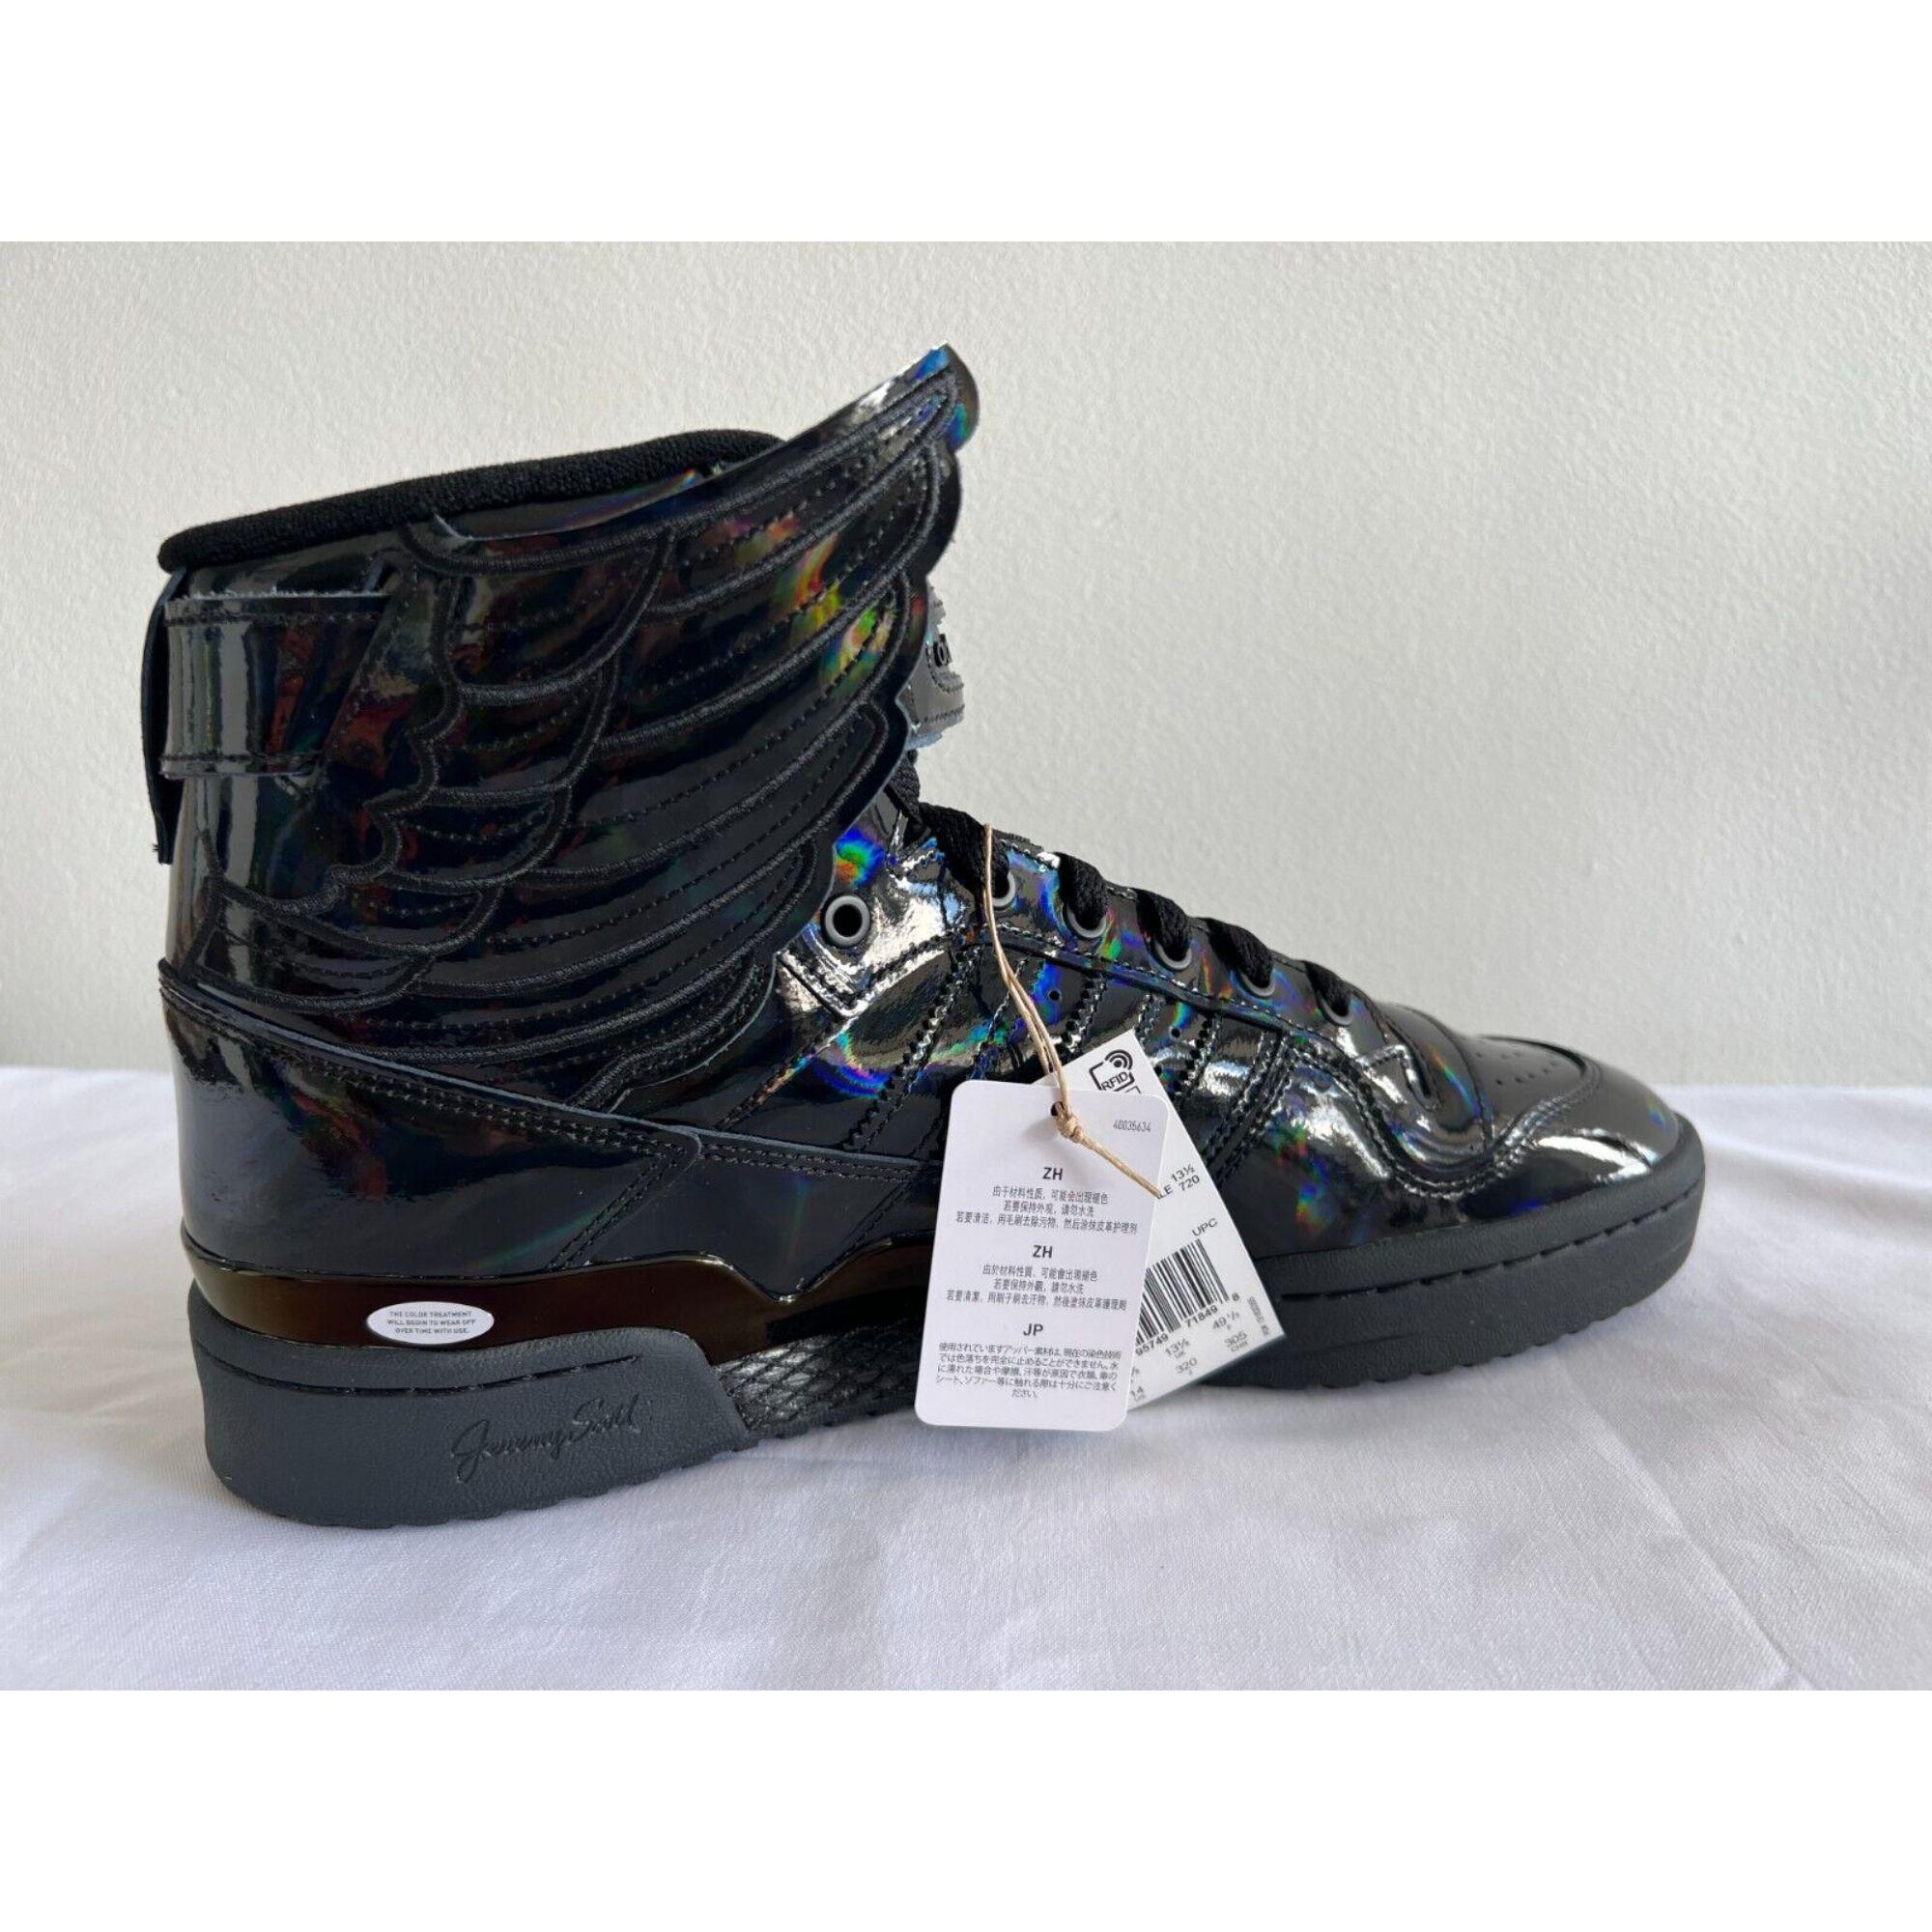 Black Adidas Originals ObyO Wings 4.0 Core Cloud Sneakers by Jeremy Scott, Size 12 For Sale